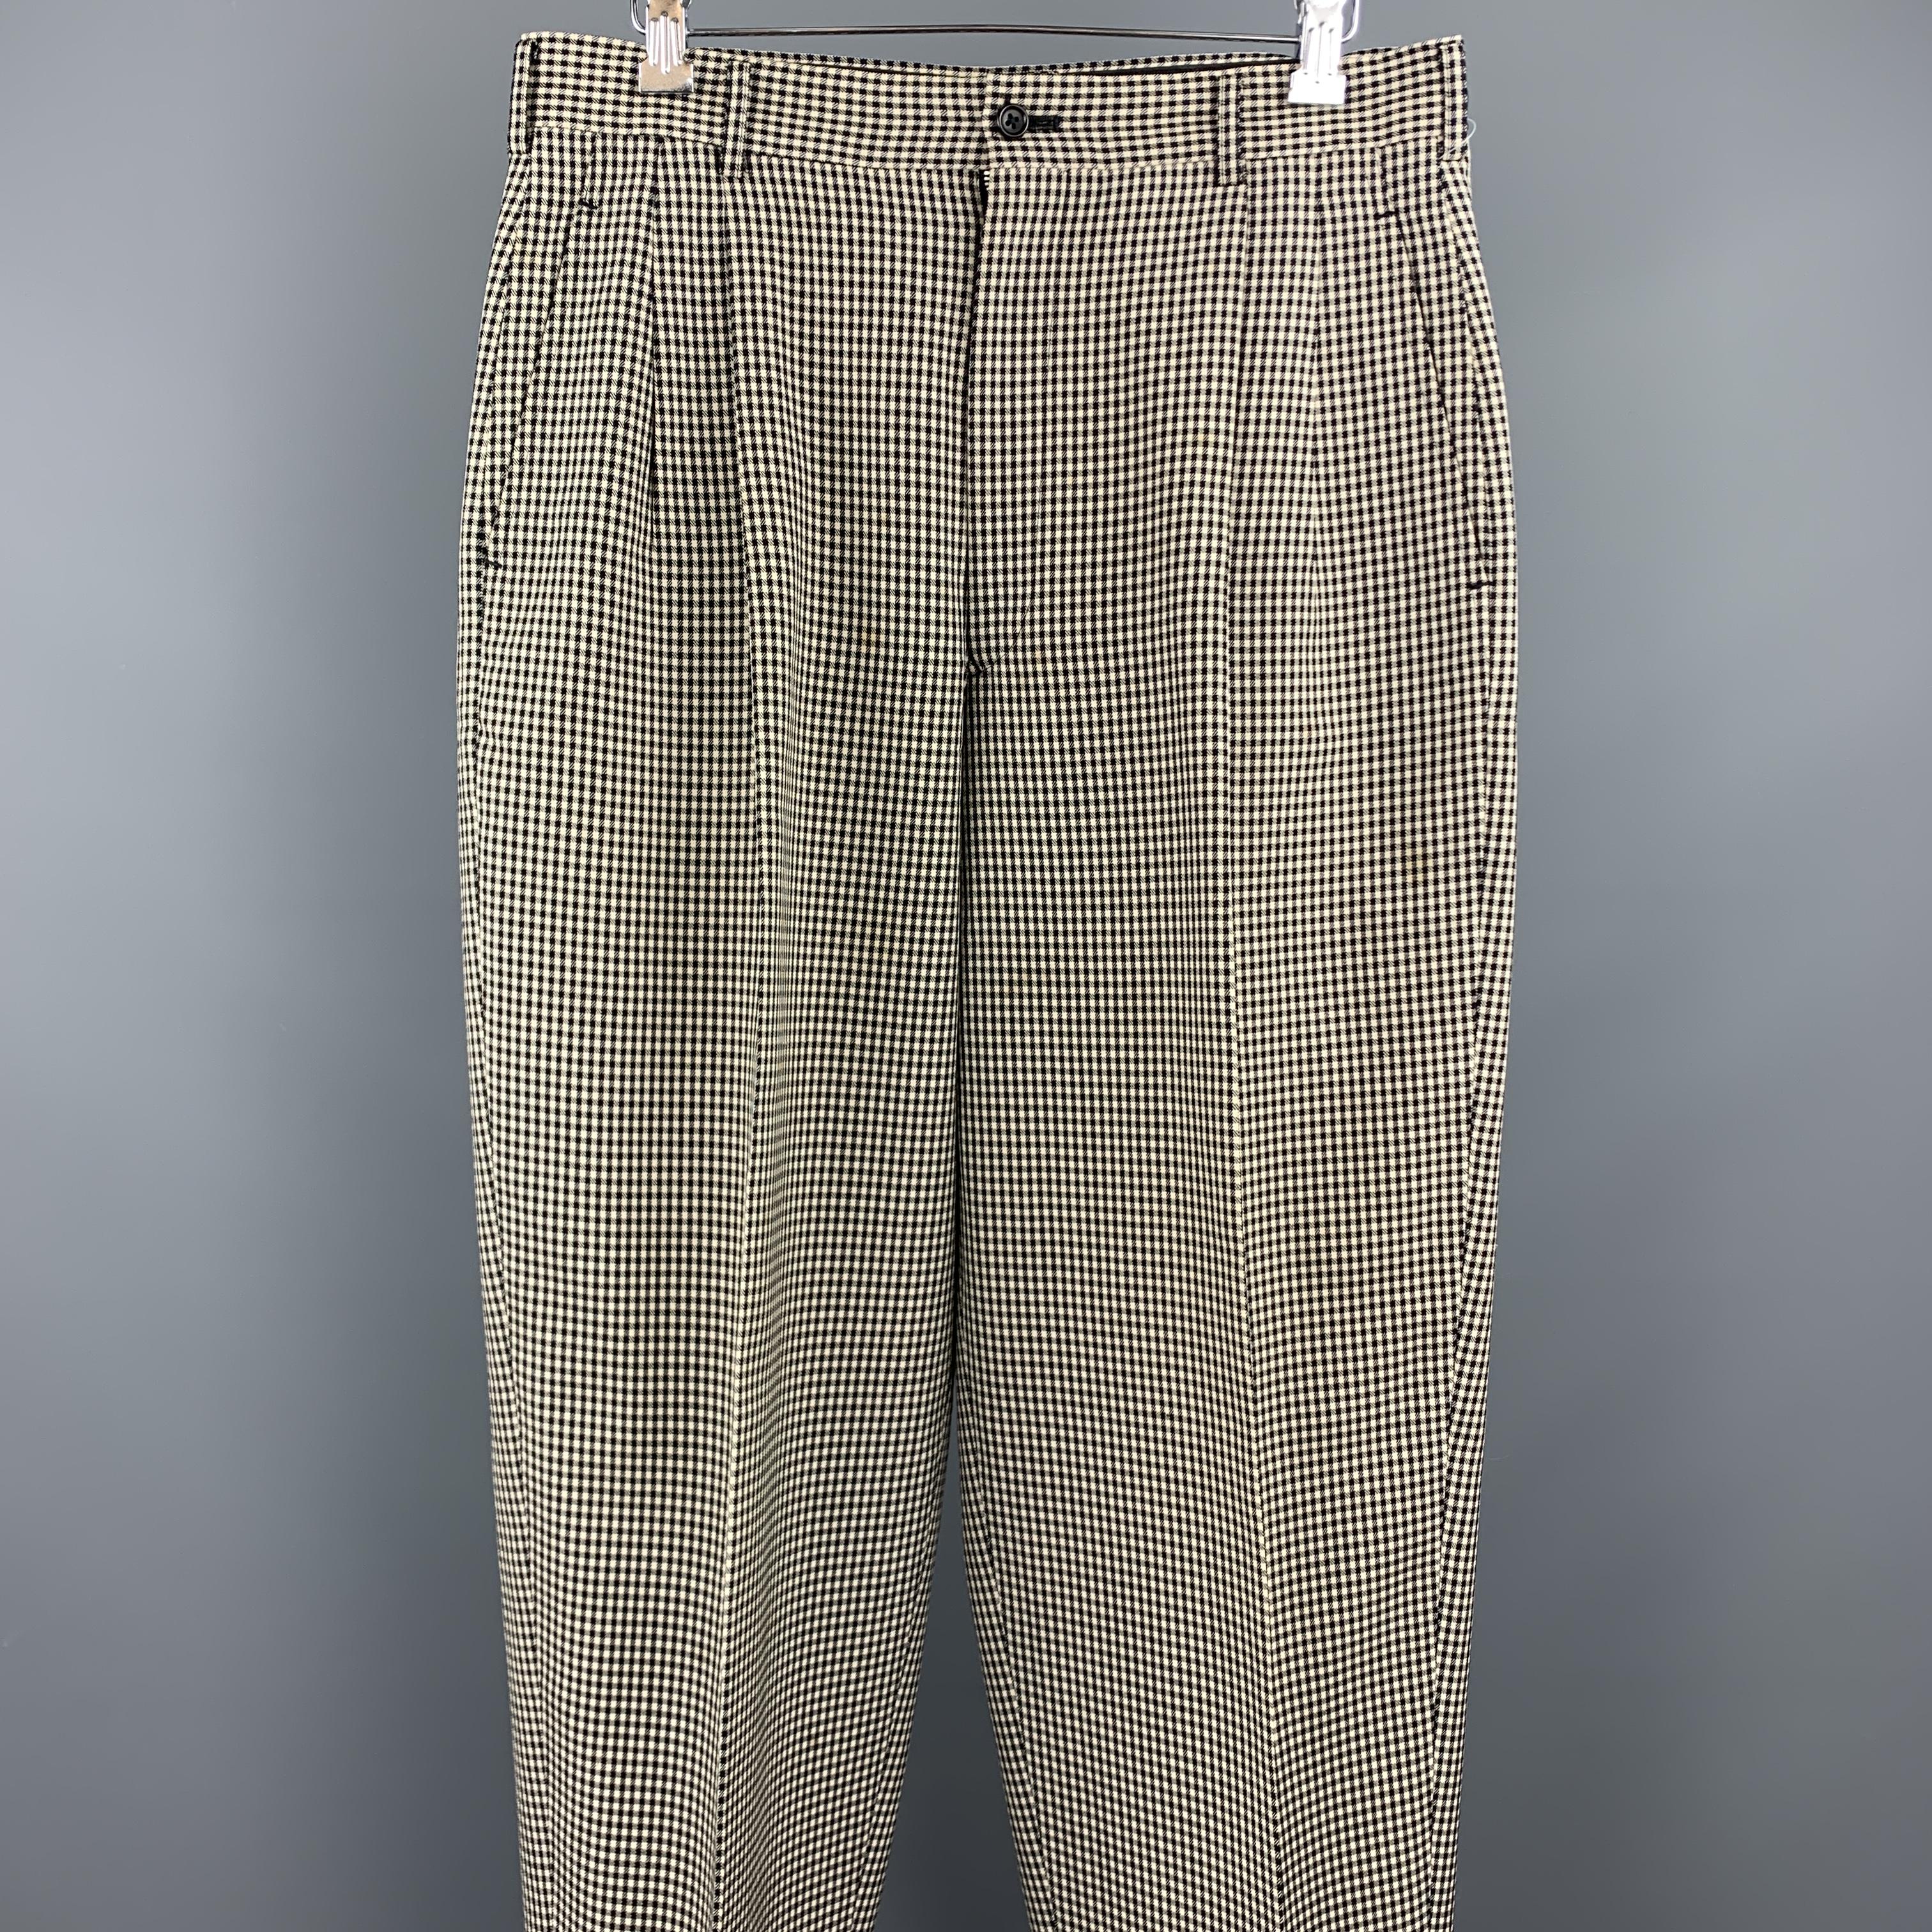 Vintage COMME des GARCONS HOMME PLUS casual pants comes in a black and white nailhead wool featuring a pleated style, leg cuffs, and a zip fly closure. Minor discoloration on lower left leg. Made in Japan. 

Very Good Pre-Owned Condition.
Marked: JP